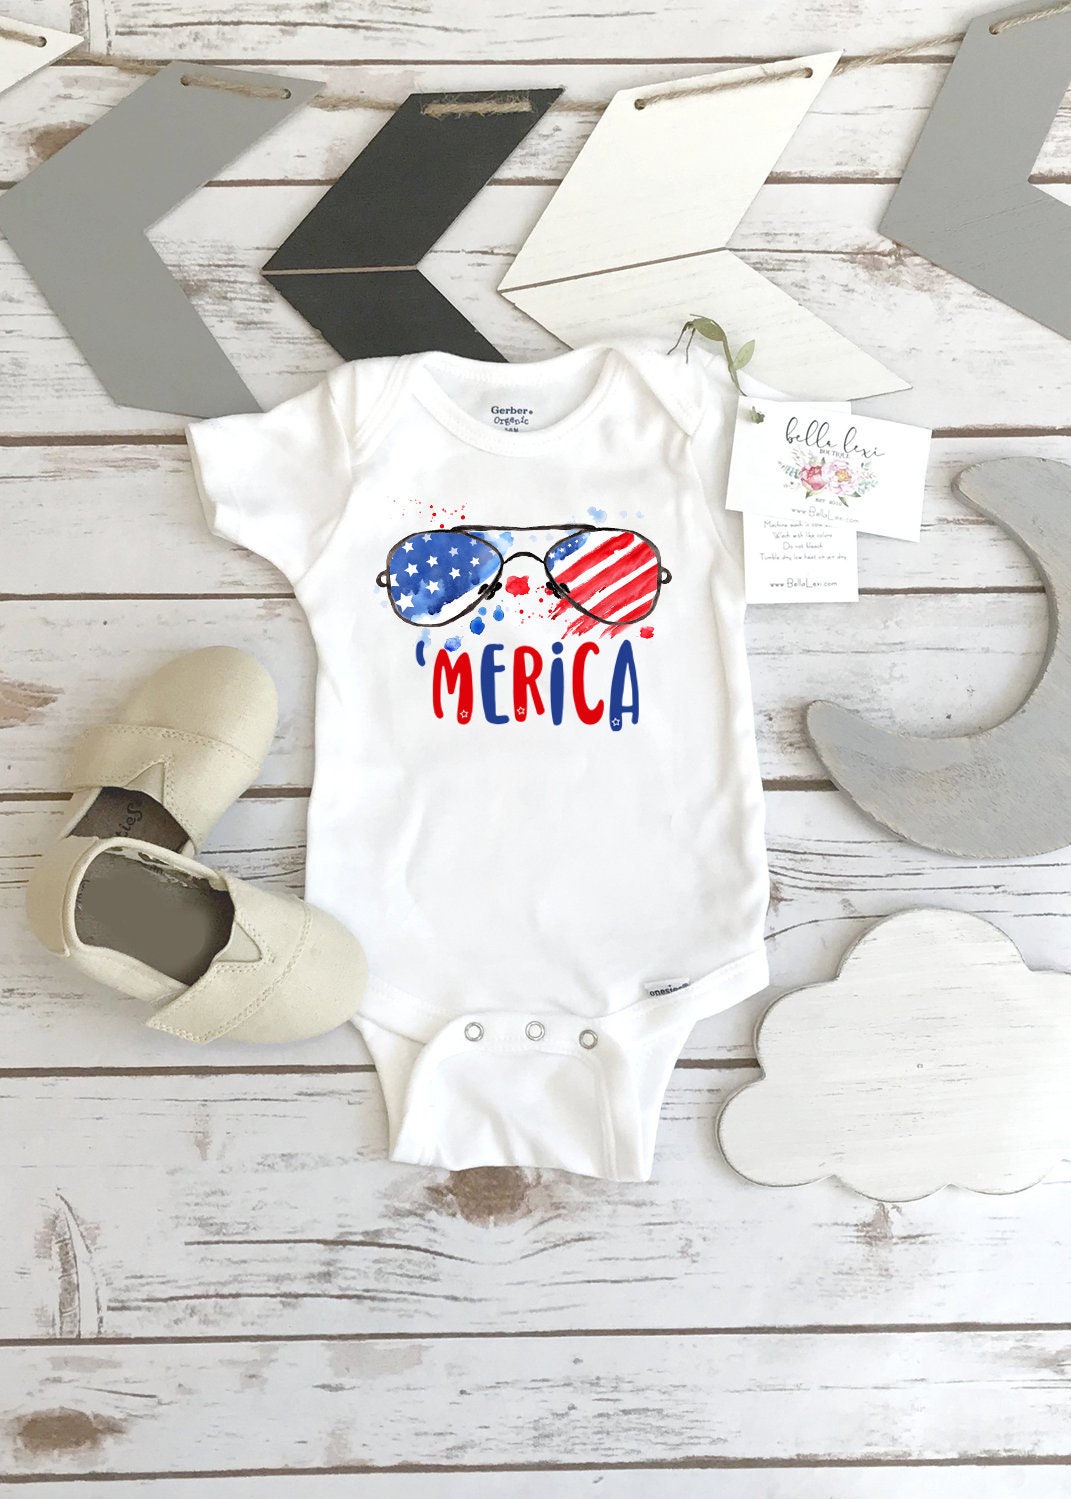 4th of July Onesie®, Patriotic Shirt, Merica, Memorial Day, 4th of July Baby, Baby Shower Gift, Murica, Funny America Shirt, 1st 4th of July